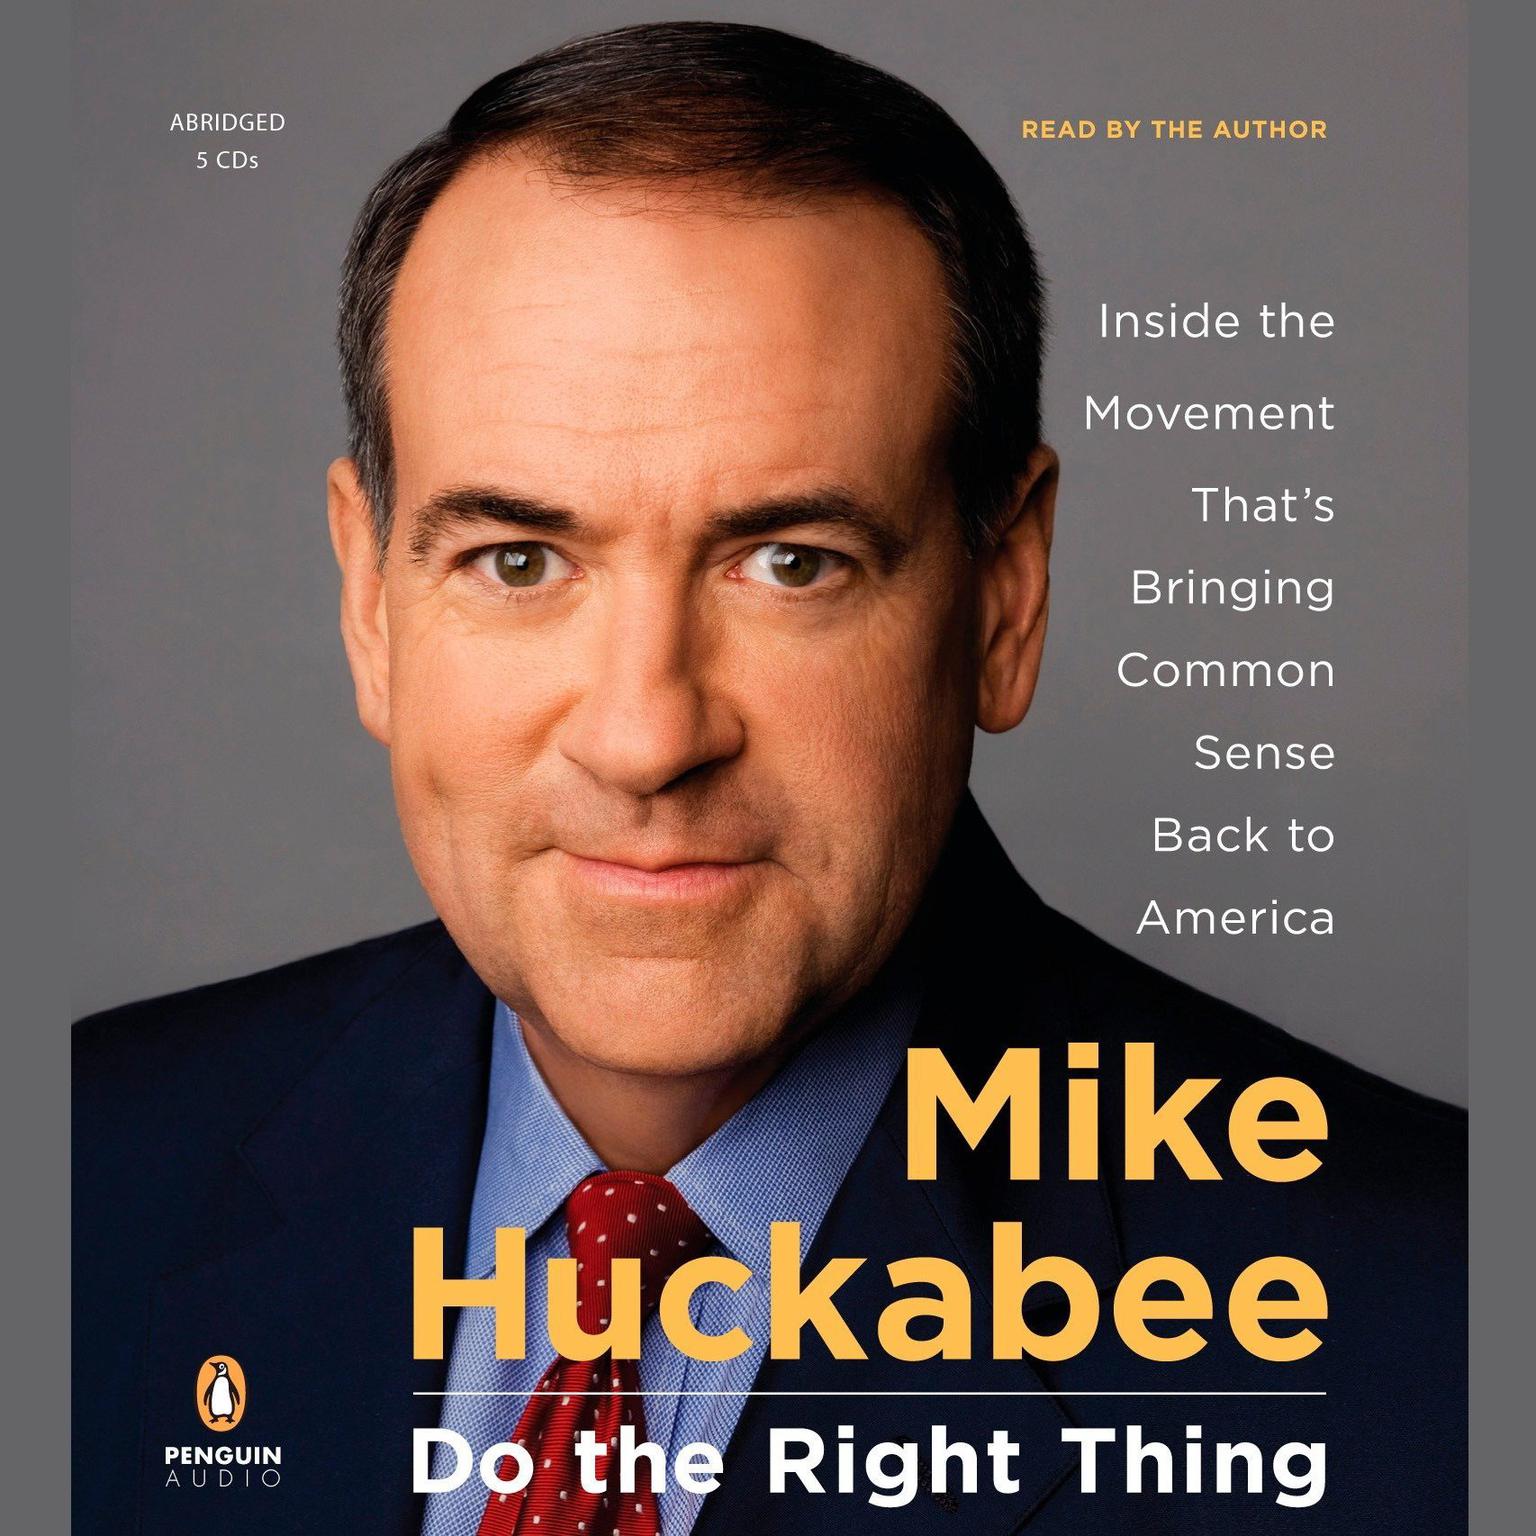 Do the Right Thing (Abridged): Inside the Movement Thats Bringing Common Sense Back to America Audiobook, by Mike Huckabee